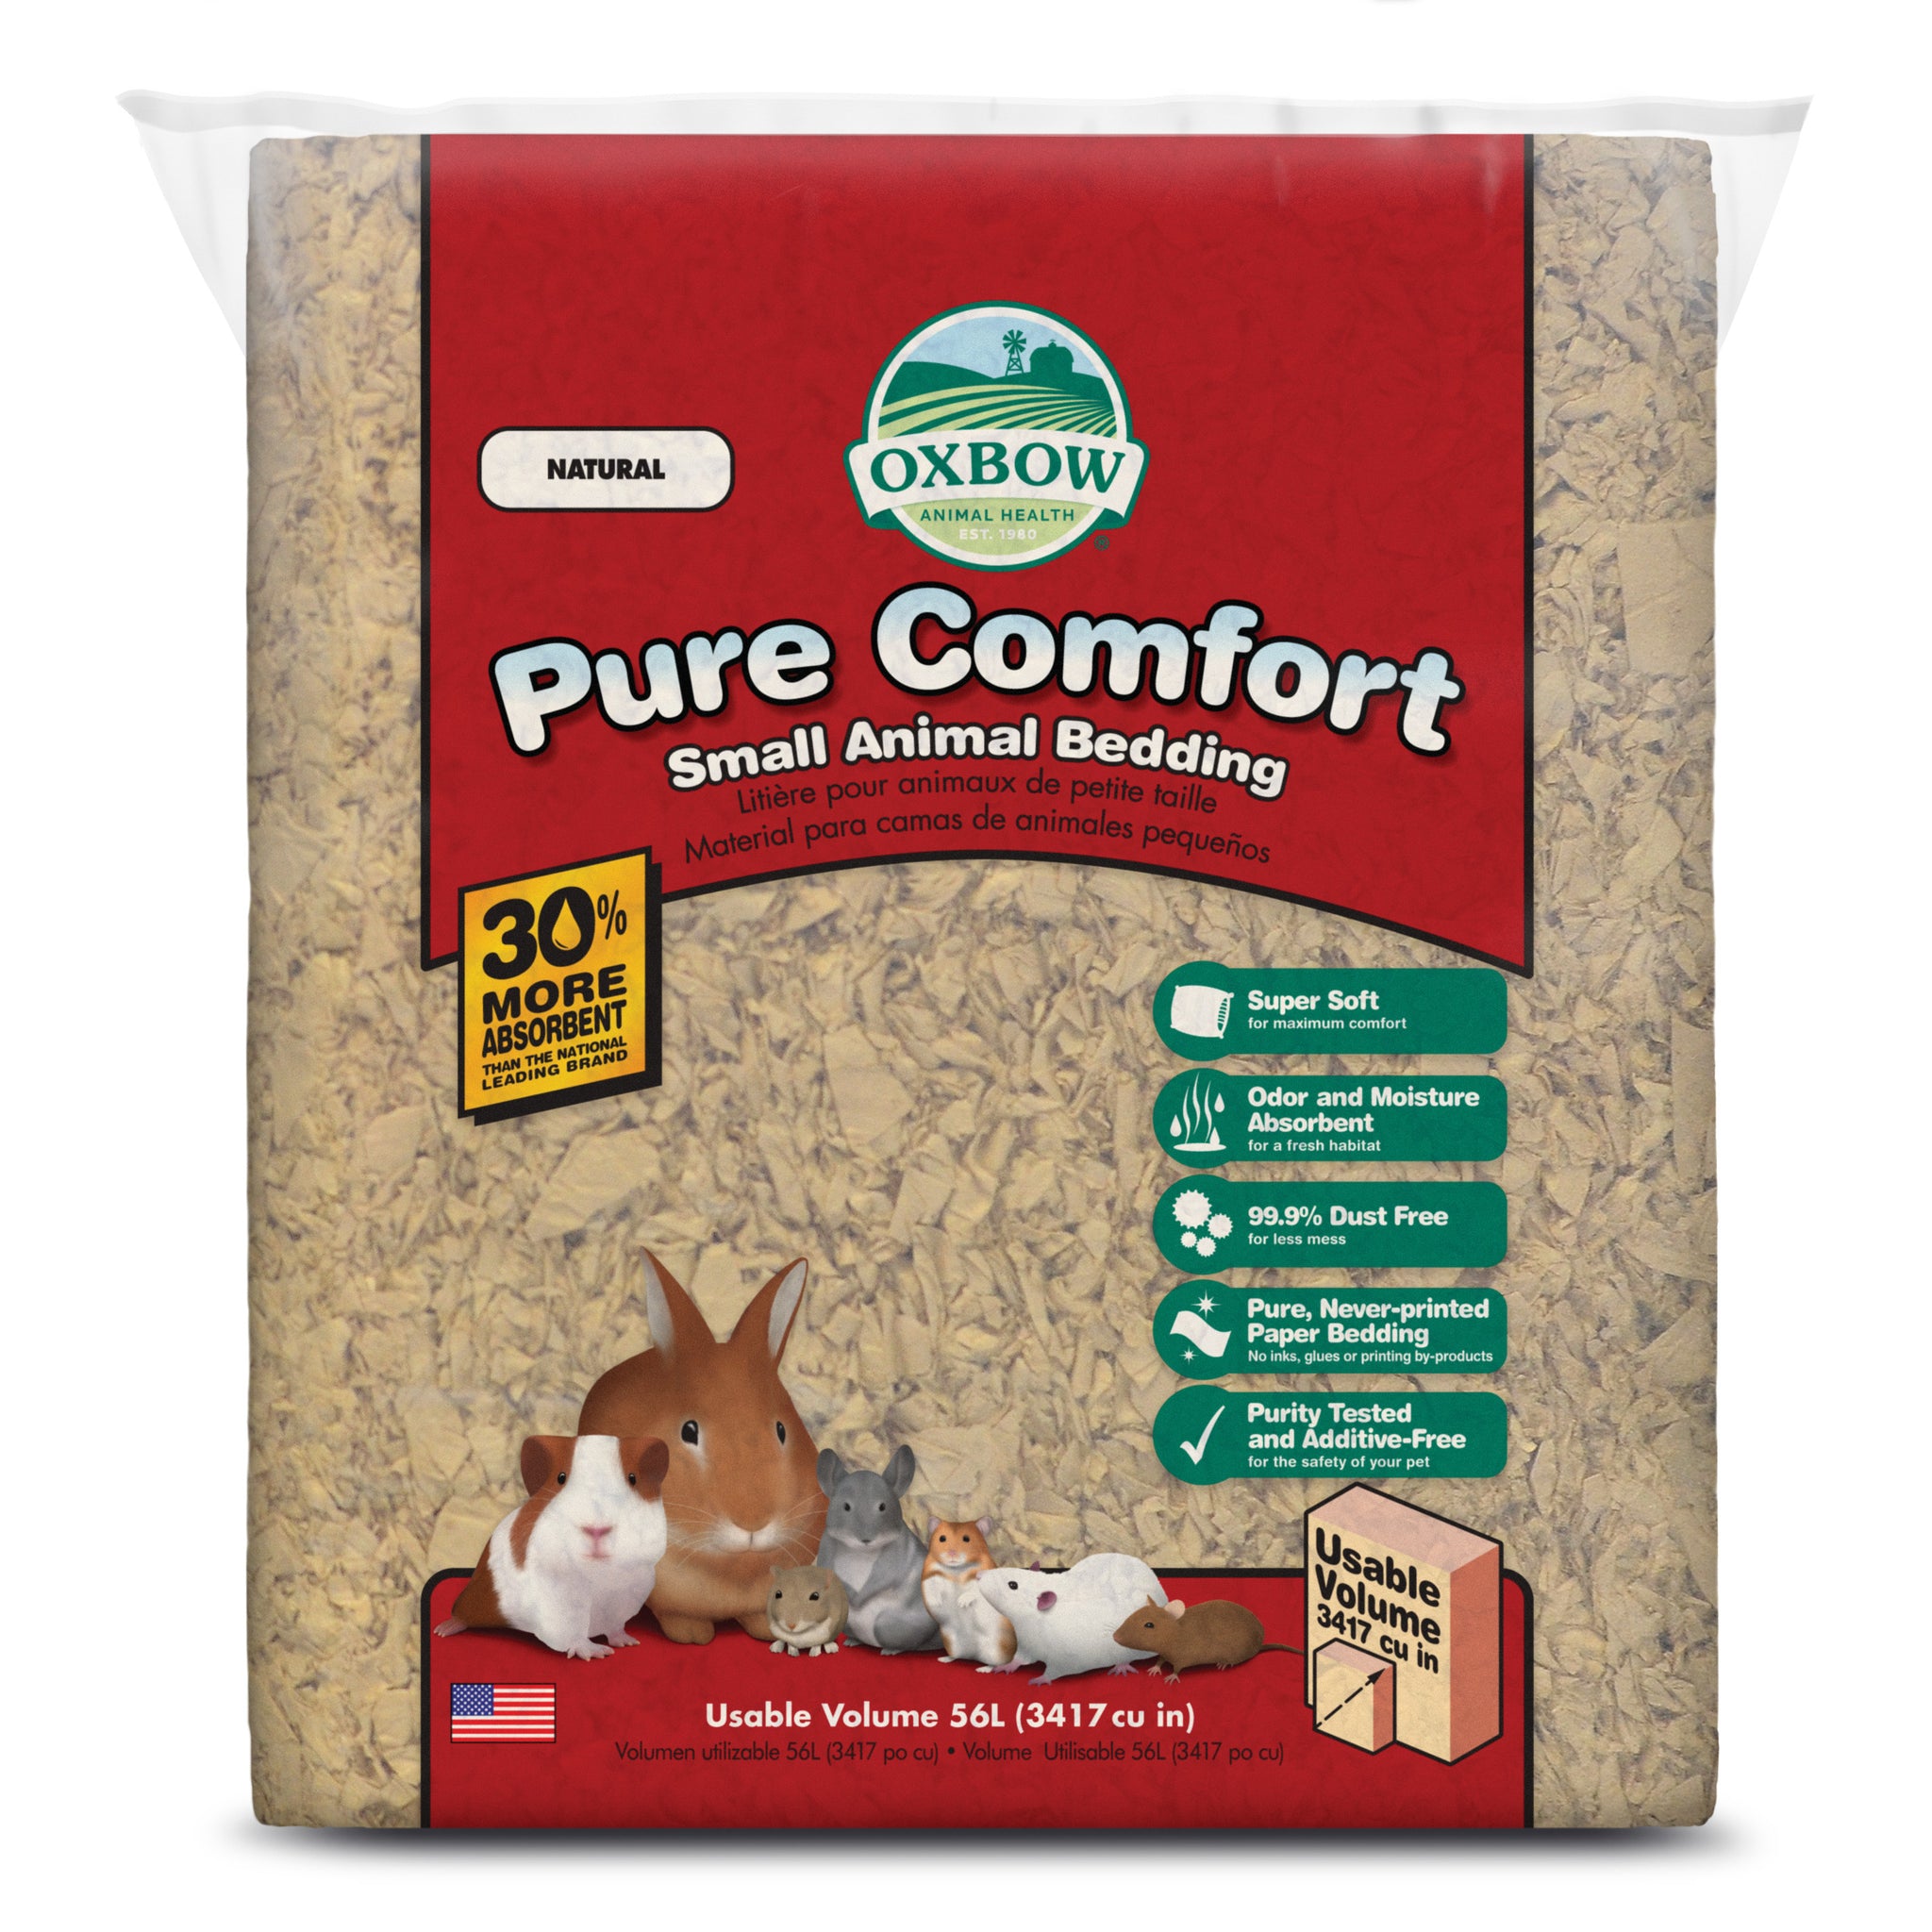 Oxbow Pure Comfort Bedding Natural 56L